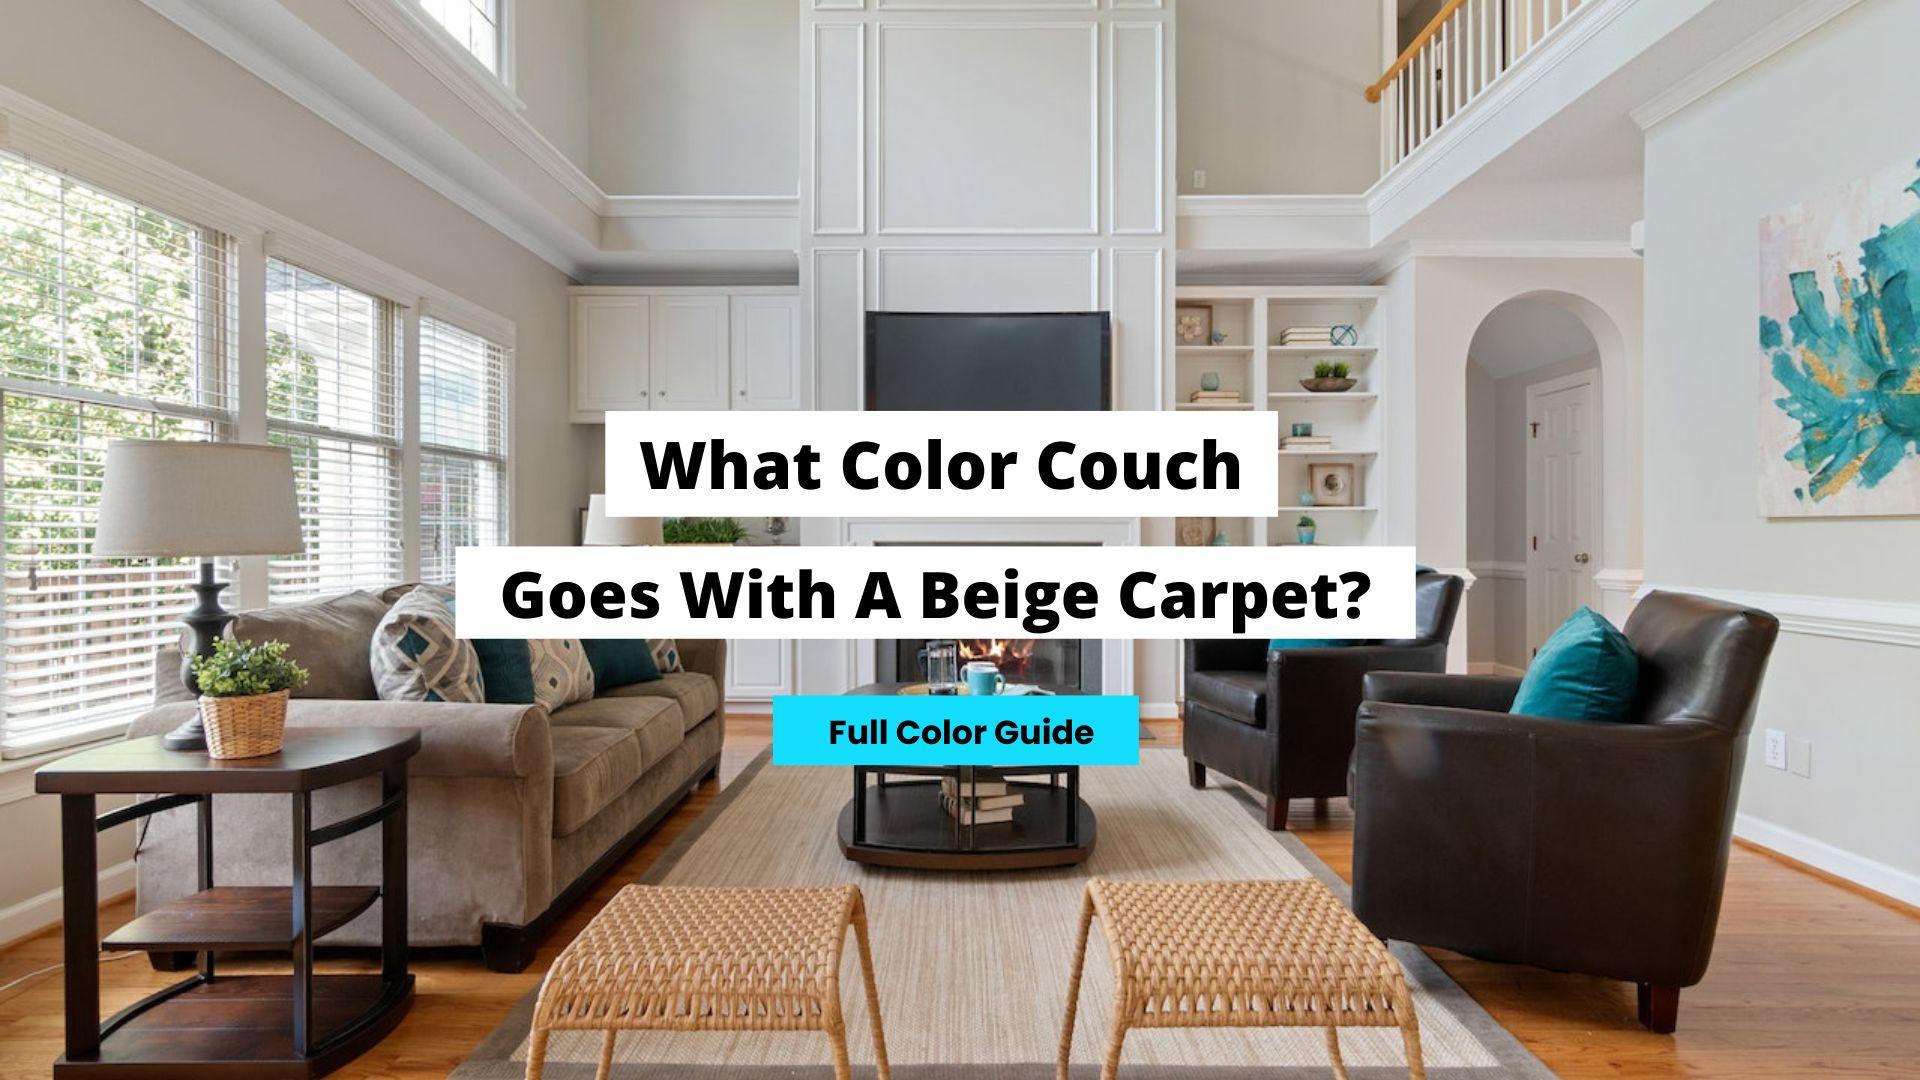 What Color Couch Goes With A Beige Carpet